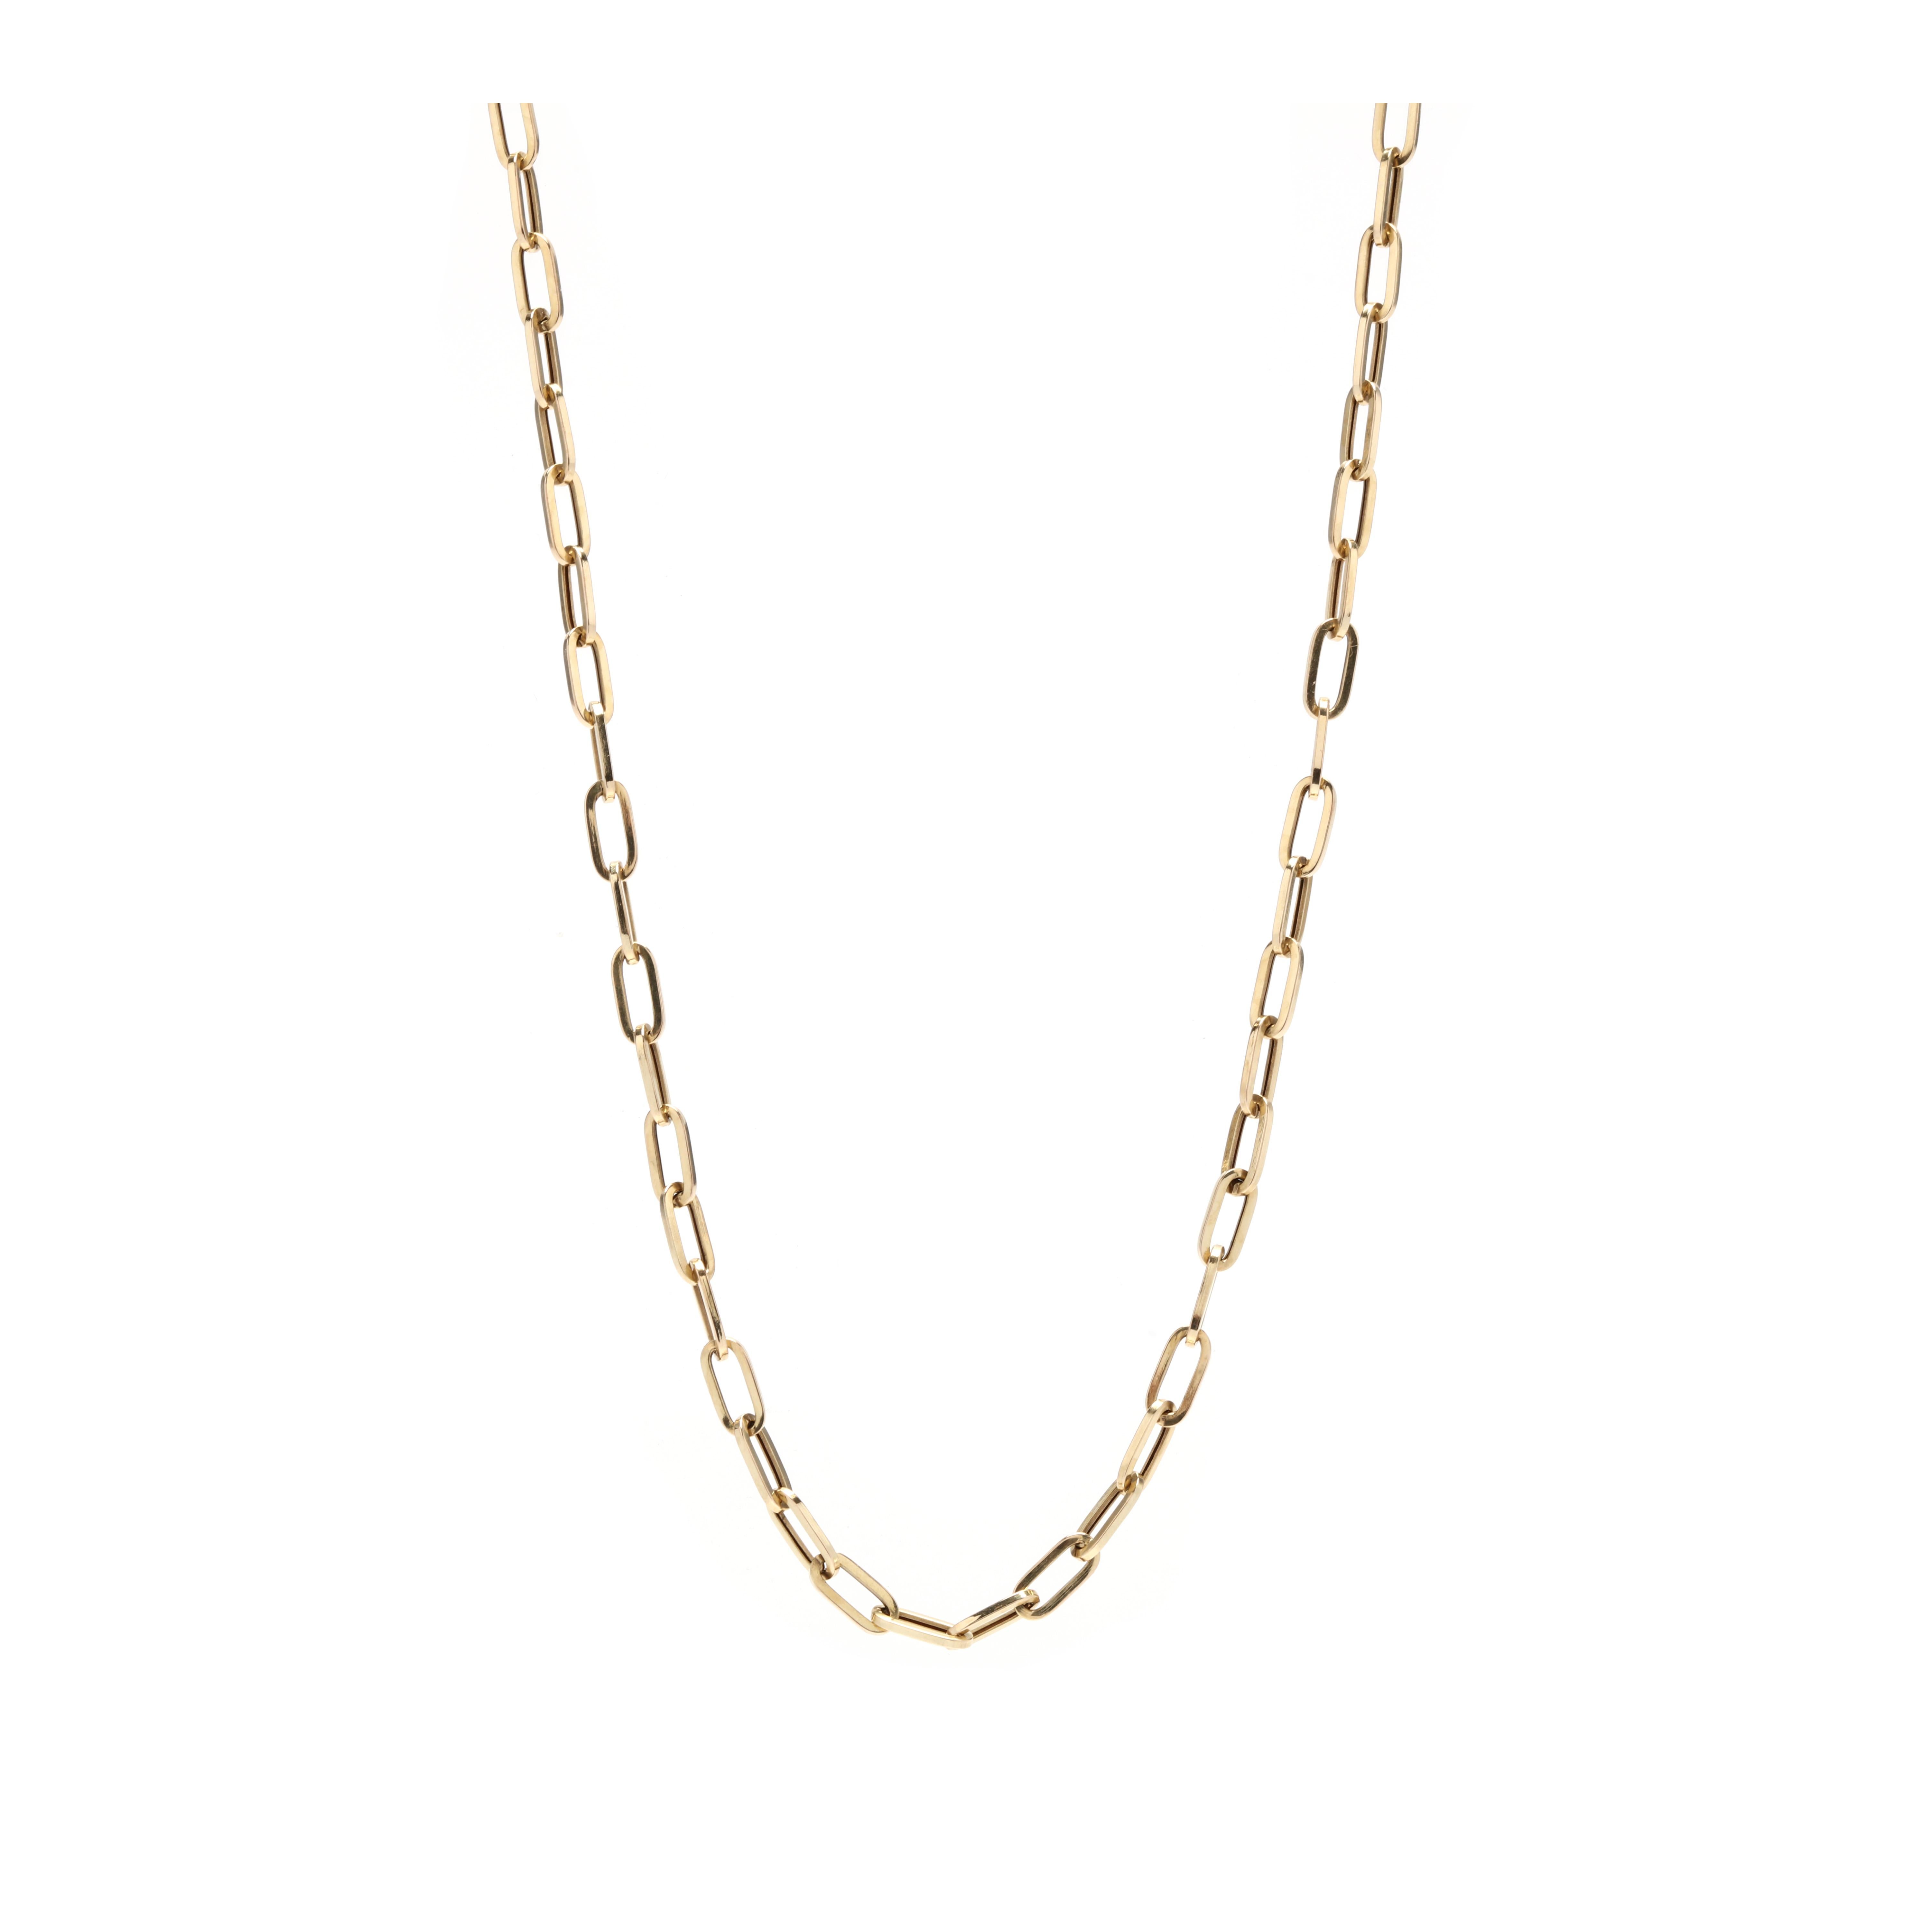 Women's or Men's Medium Paperclip Chain Necklace, 14K Yellow Gold For Sale